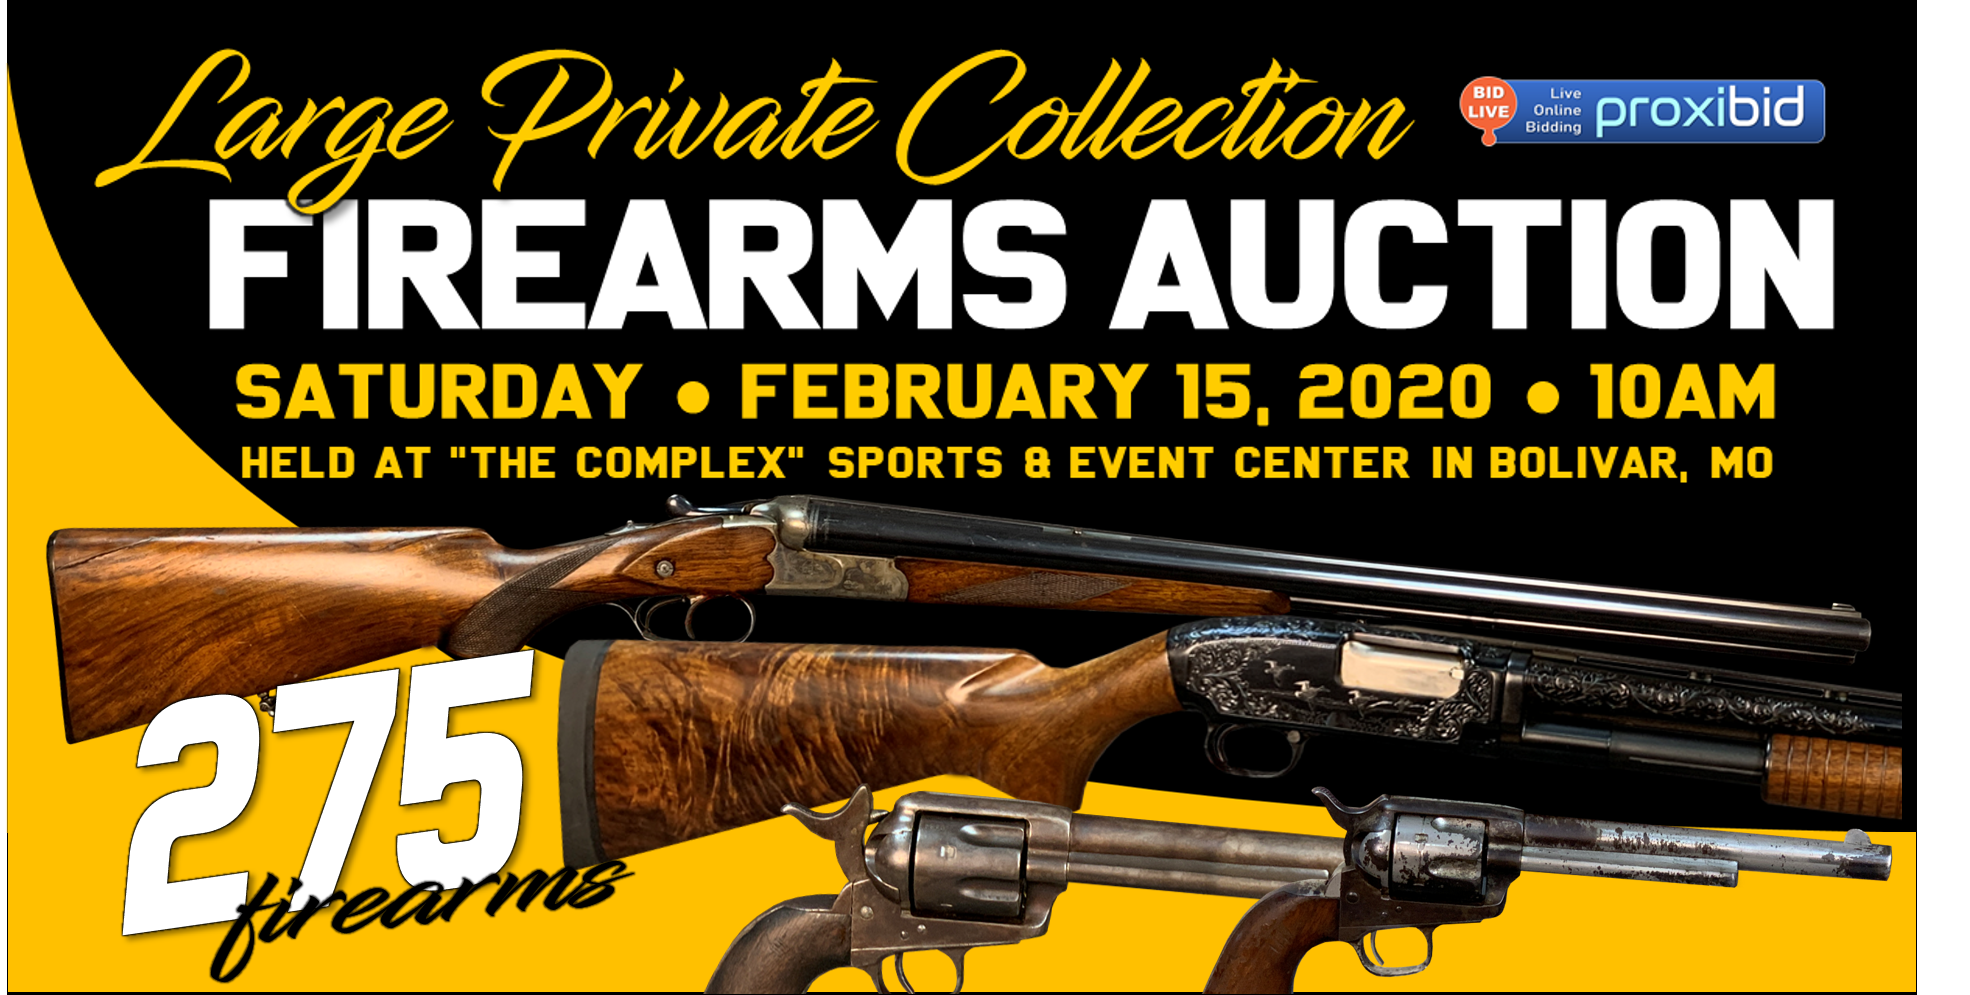 LARGE PRIVATE COLLECTION FIREARMS AUCTION